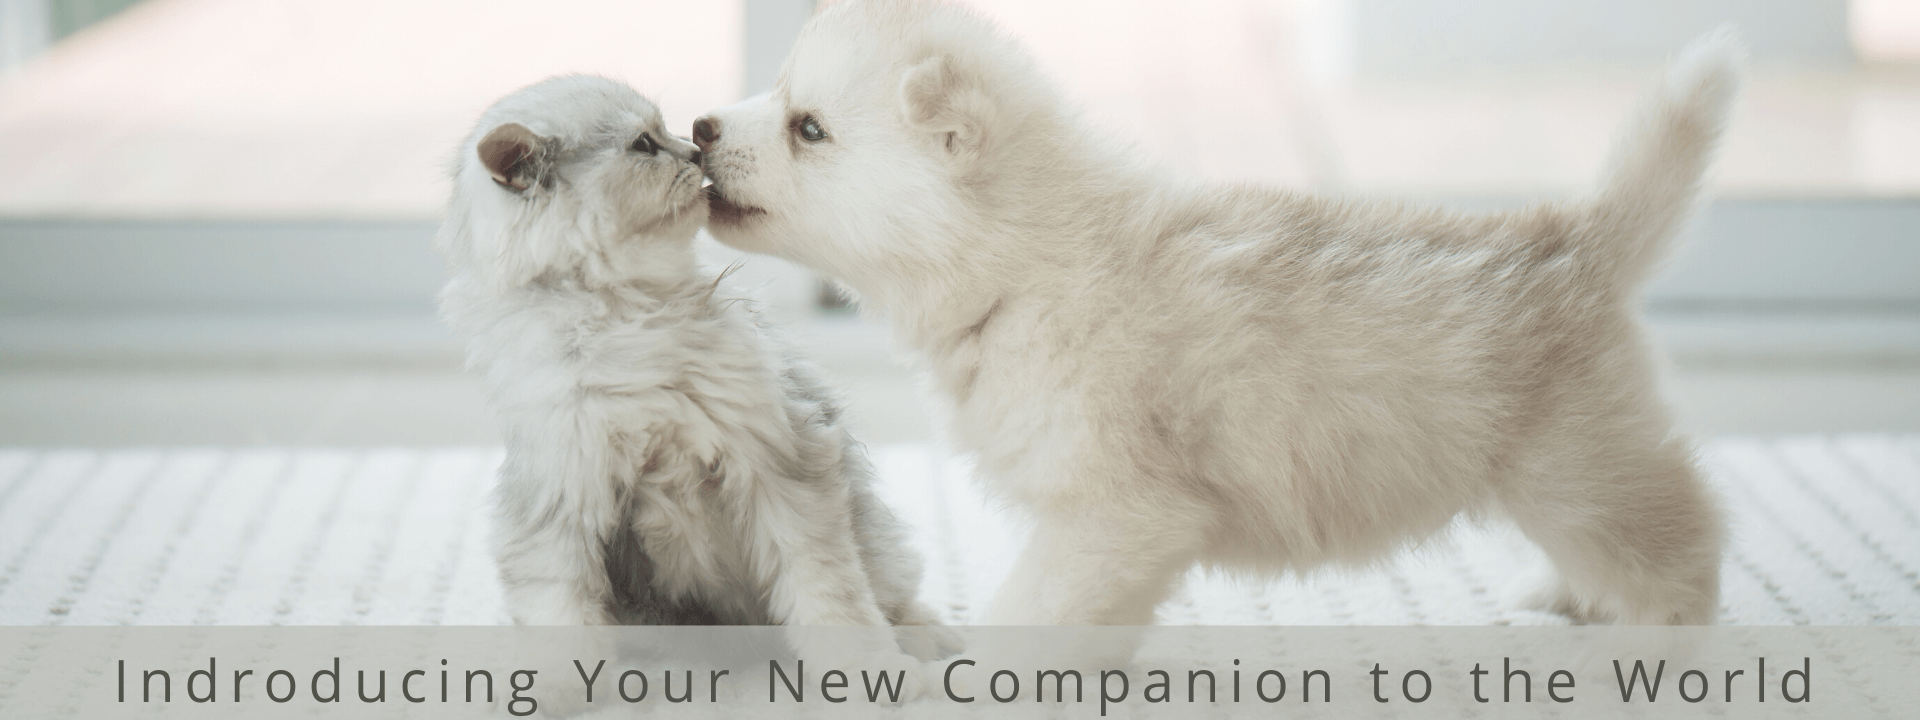 Indroducing Your New Companion to the World